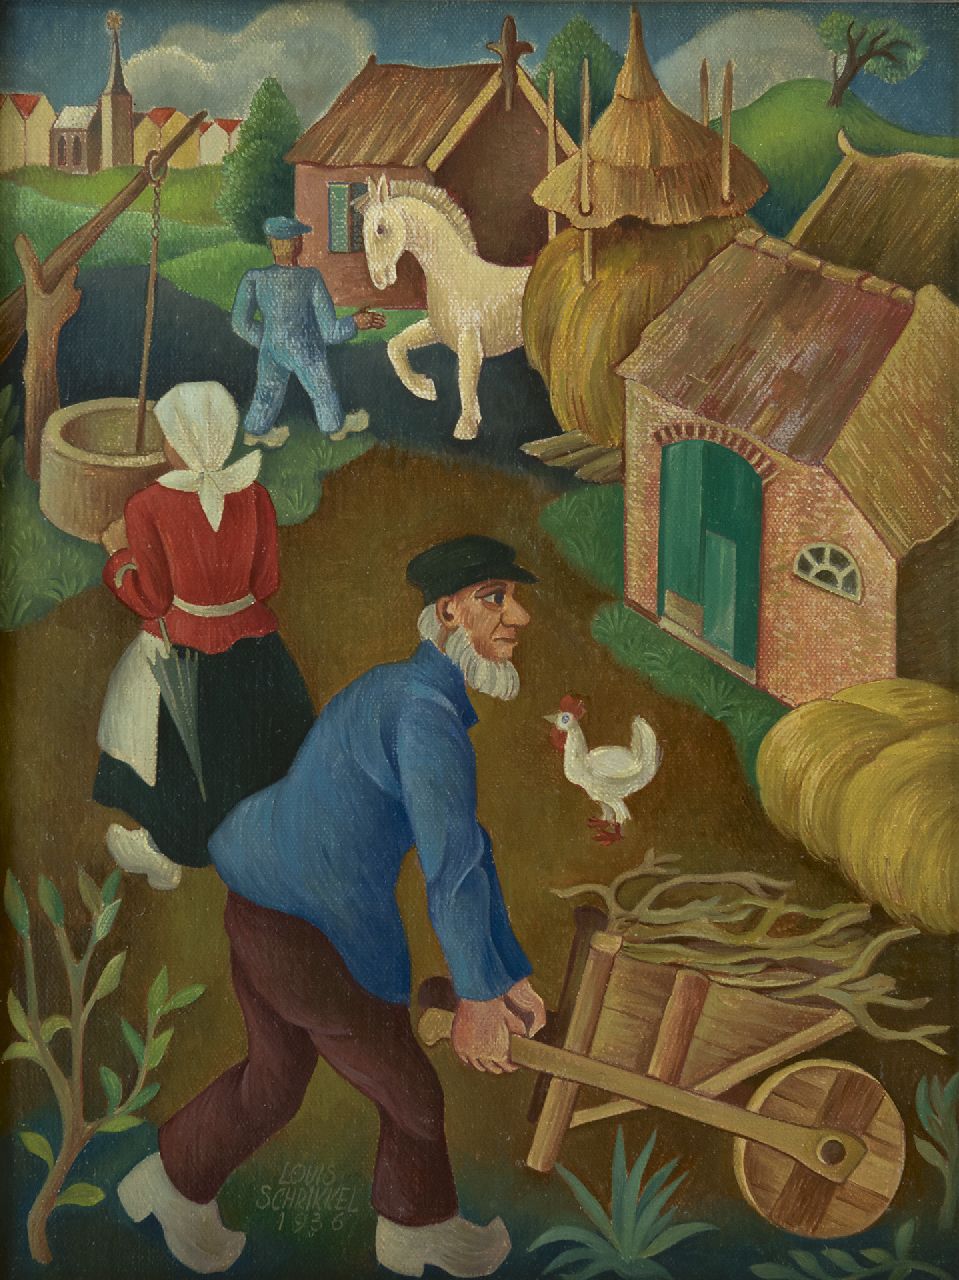 Schrikkel J.L.  | Johannes Lodewijk 'Louis' Schrikkel | Paintings offered for sale | Activity on the farm, oil on canvas laid down on panel 35.5 x 27.1 cm, signed l.l. and dated 1936